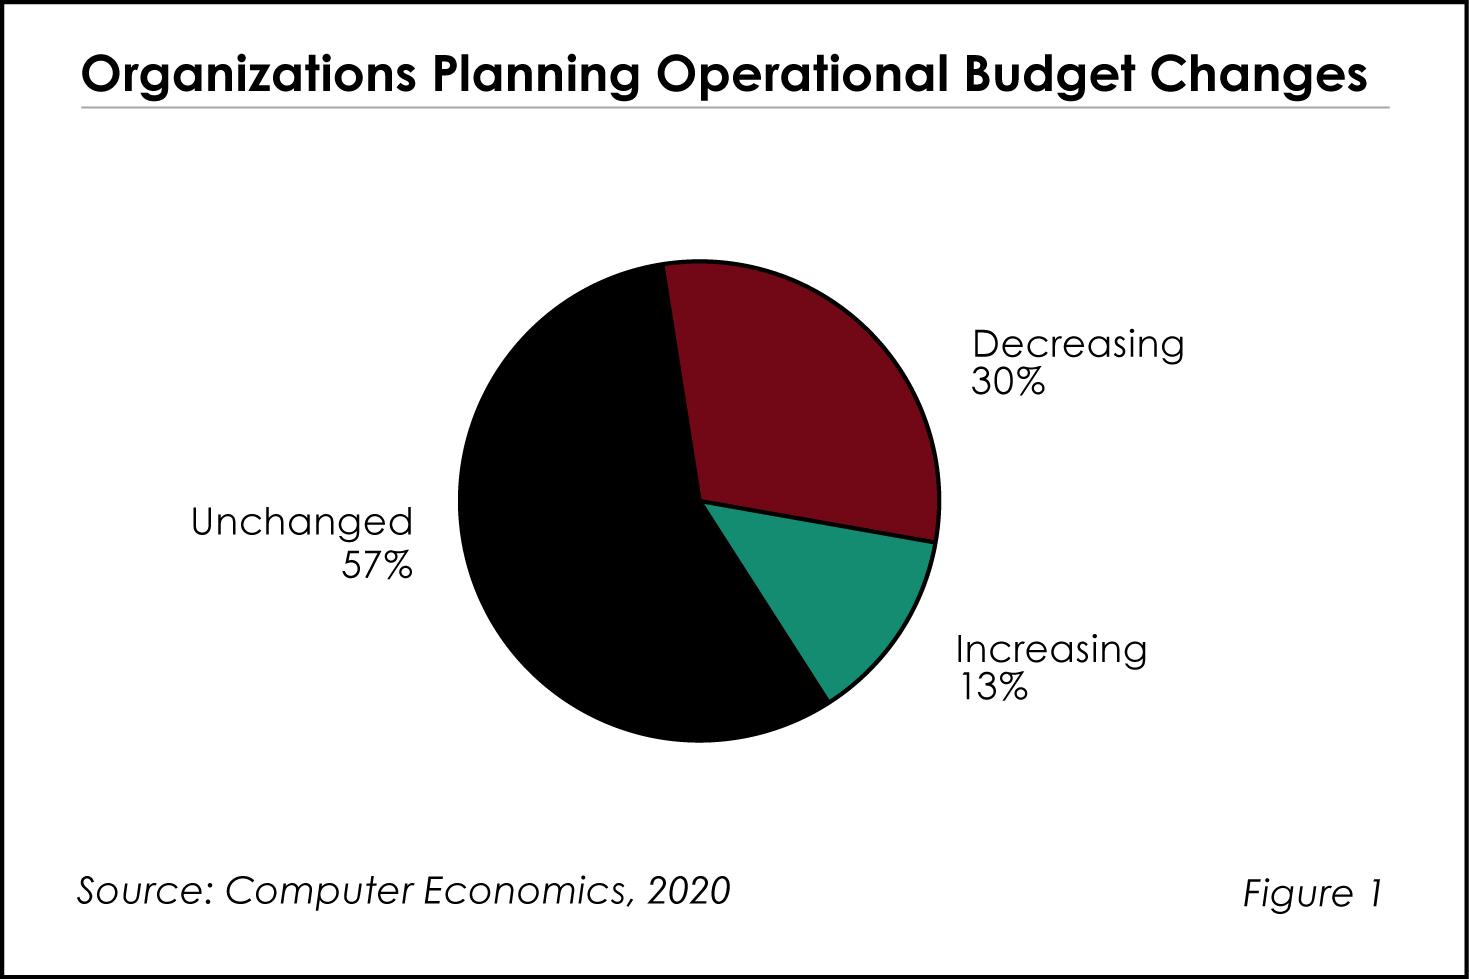 Fig. 1: Organizations Planning Operational Budget Changes